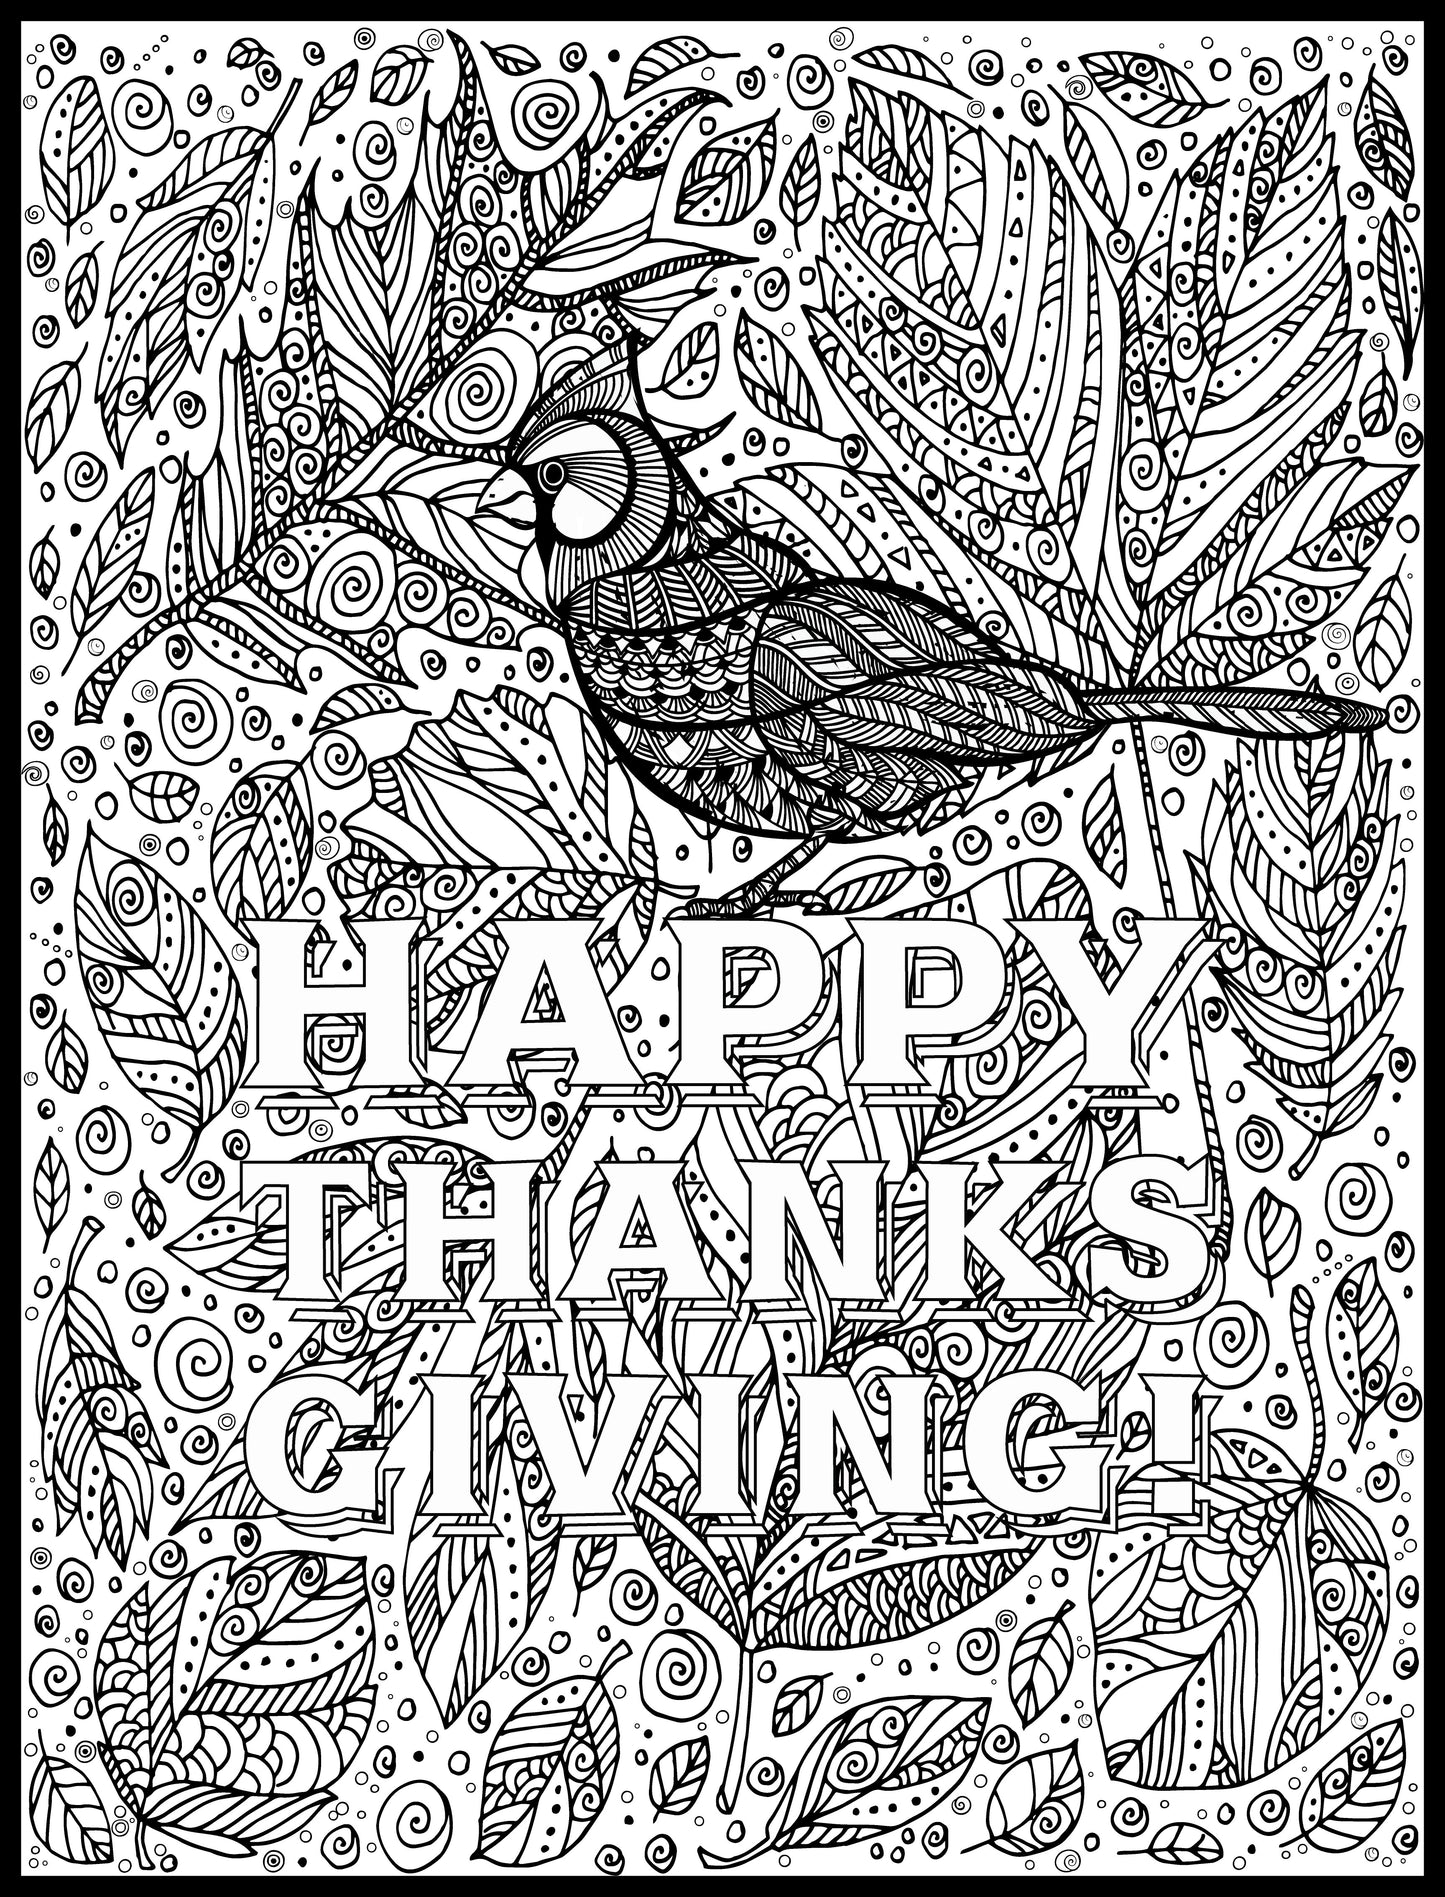 Cardinal Thanks Personalized Giant Coloring Poster 46"x60"